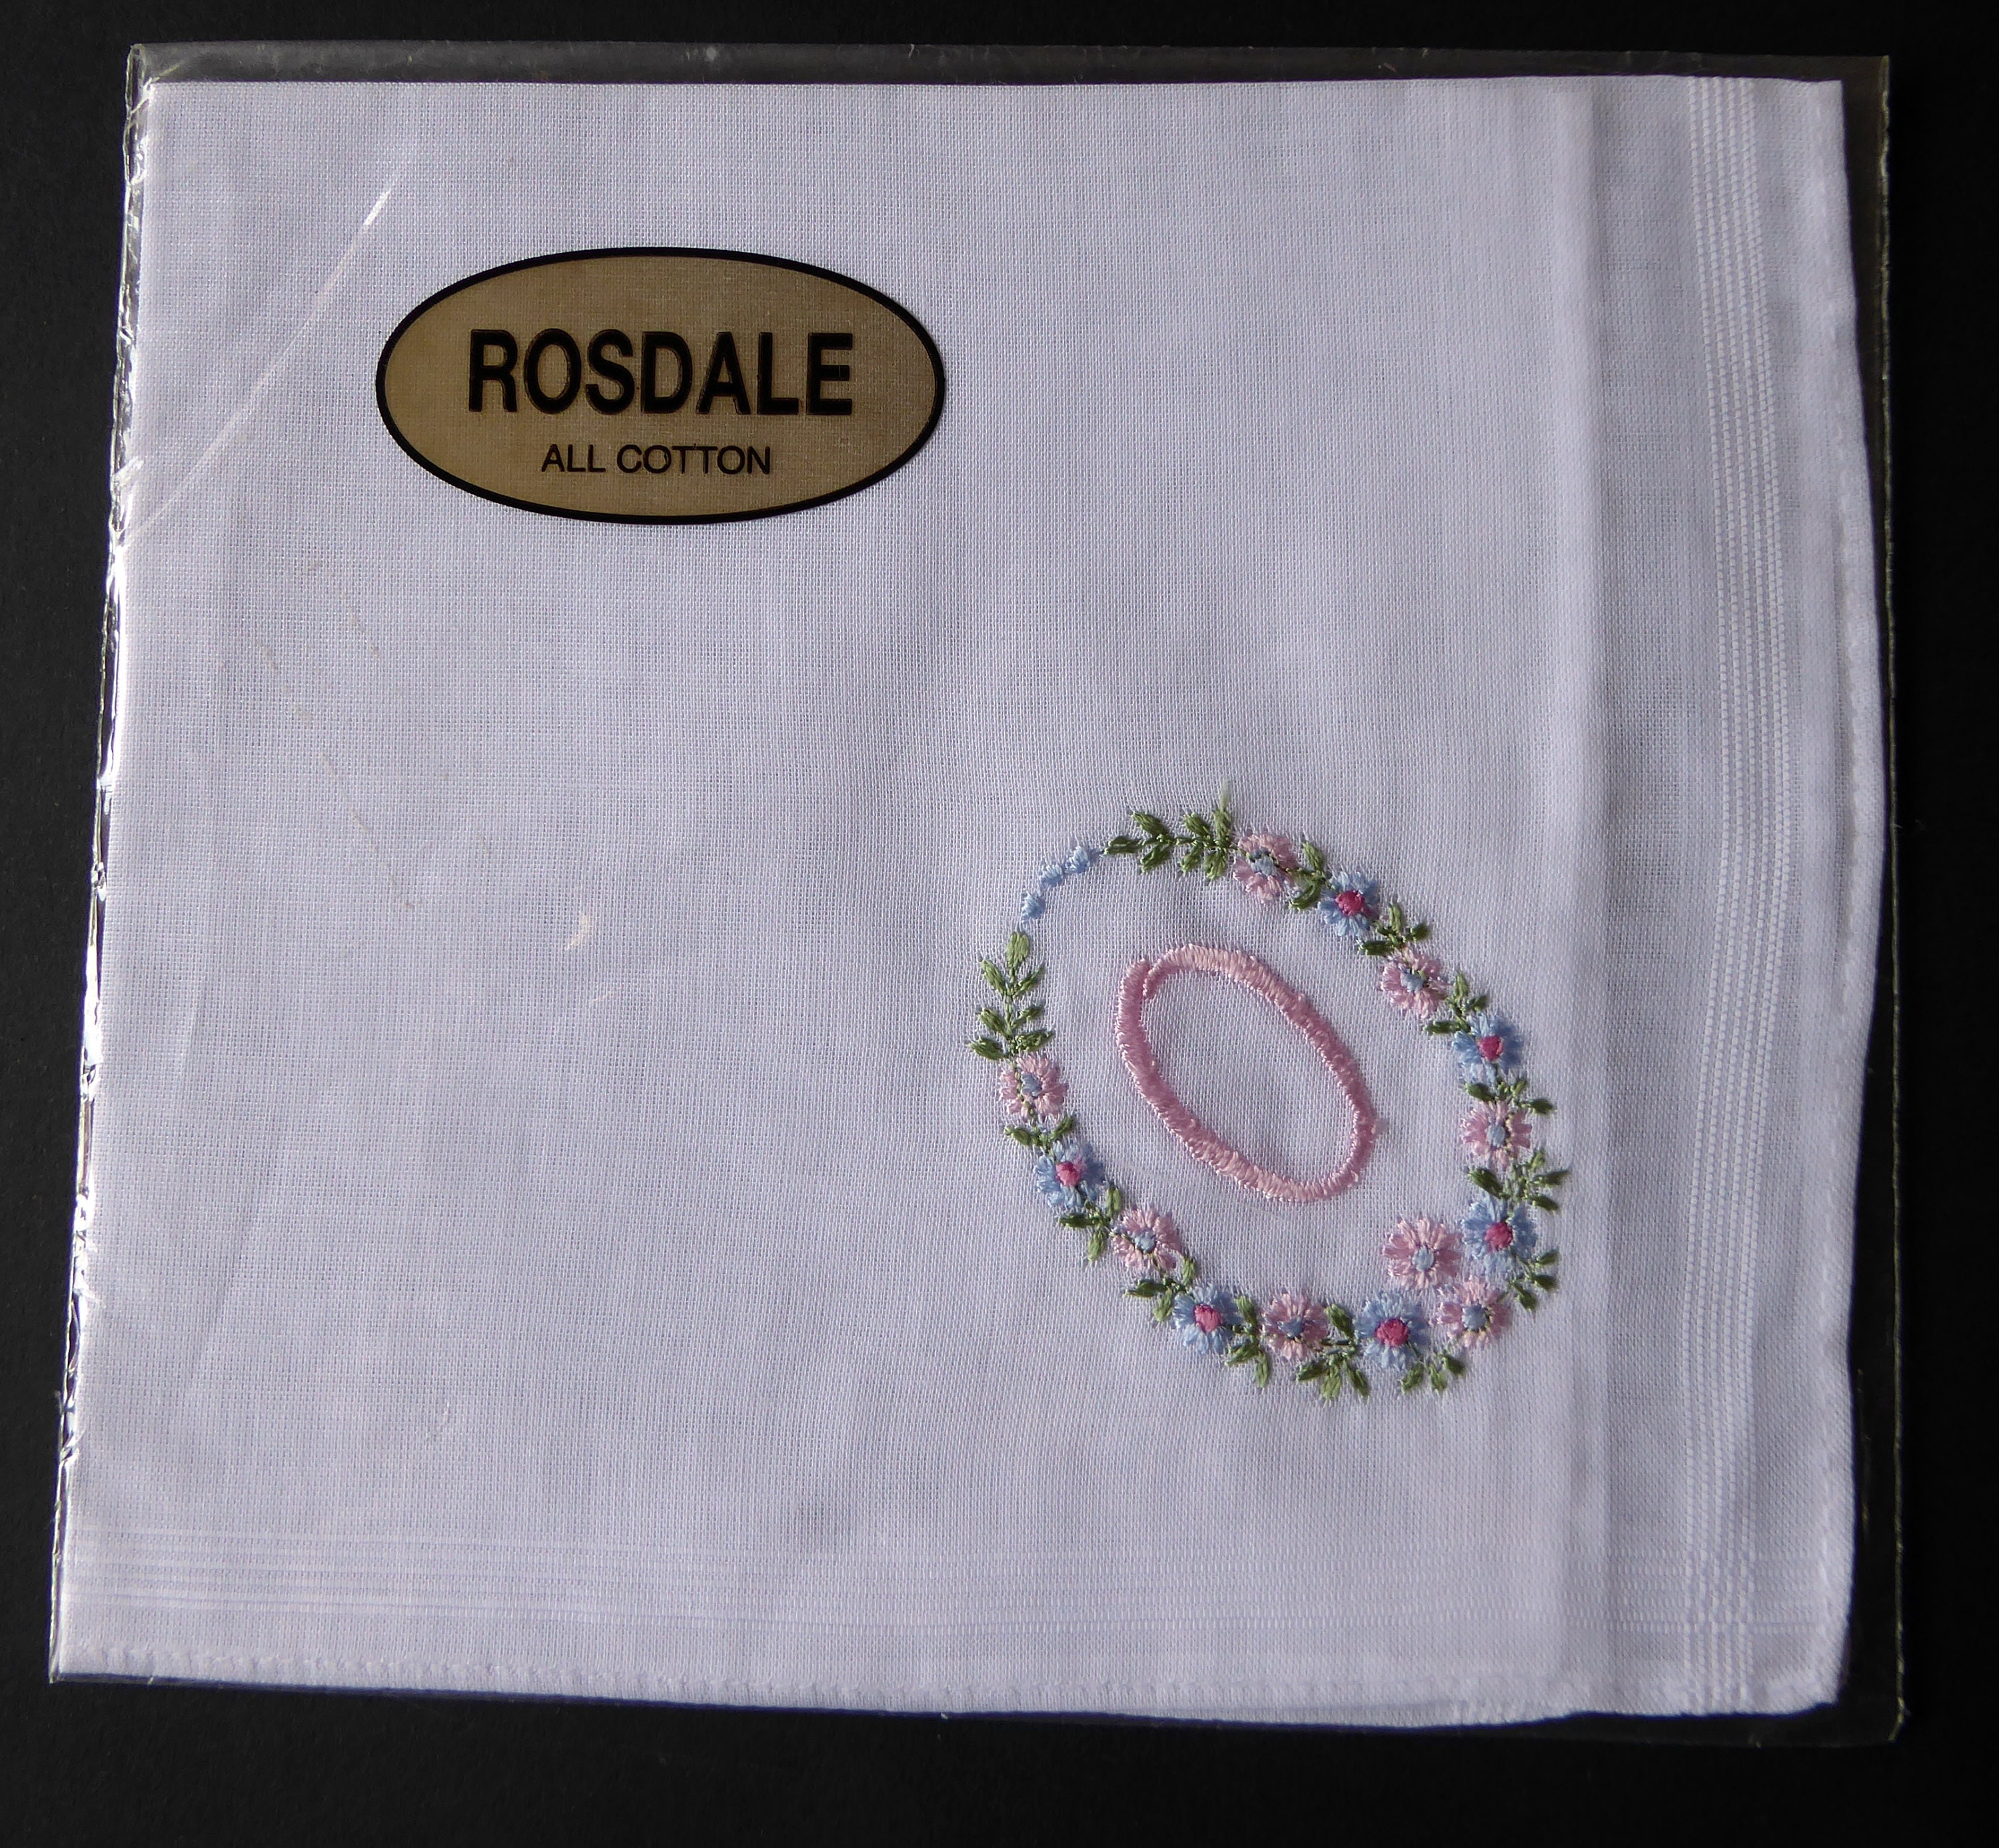 Rosdale cotton handkerchief with embroidered white flower